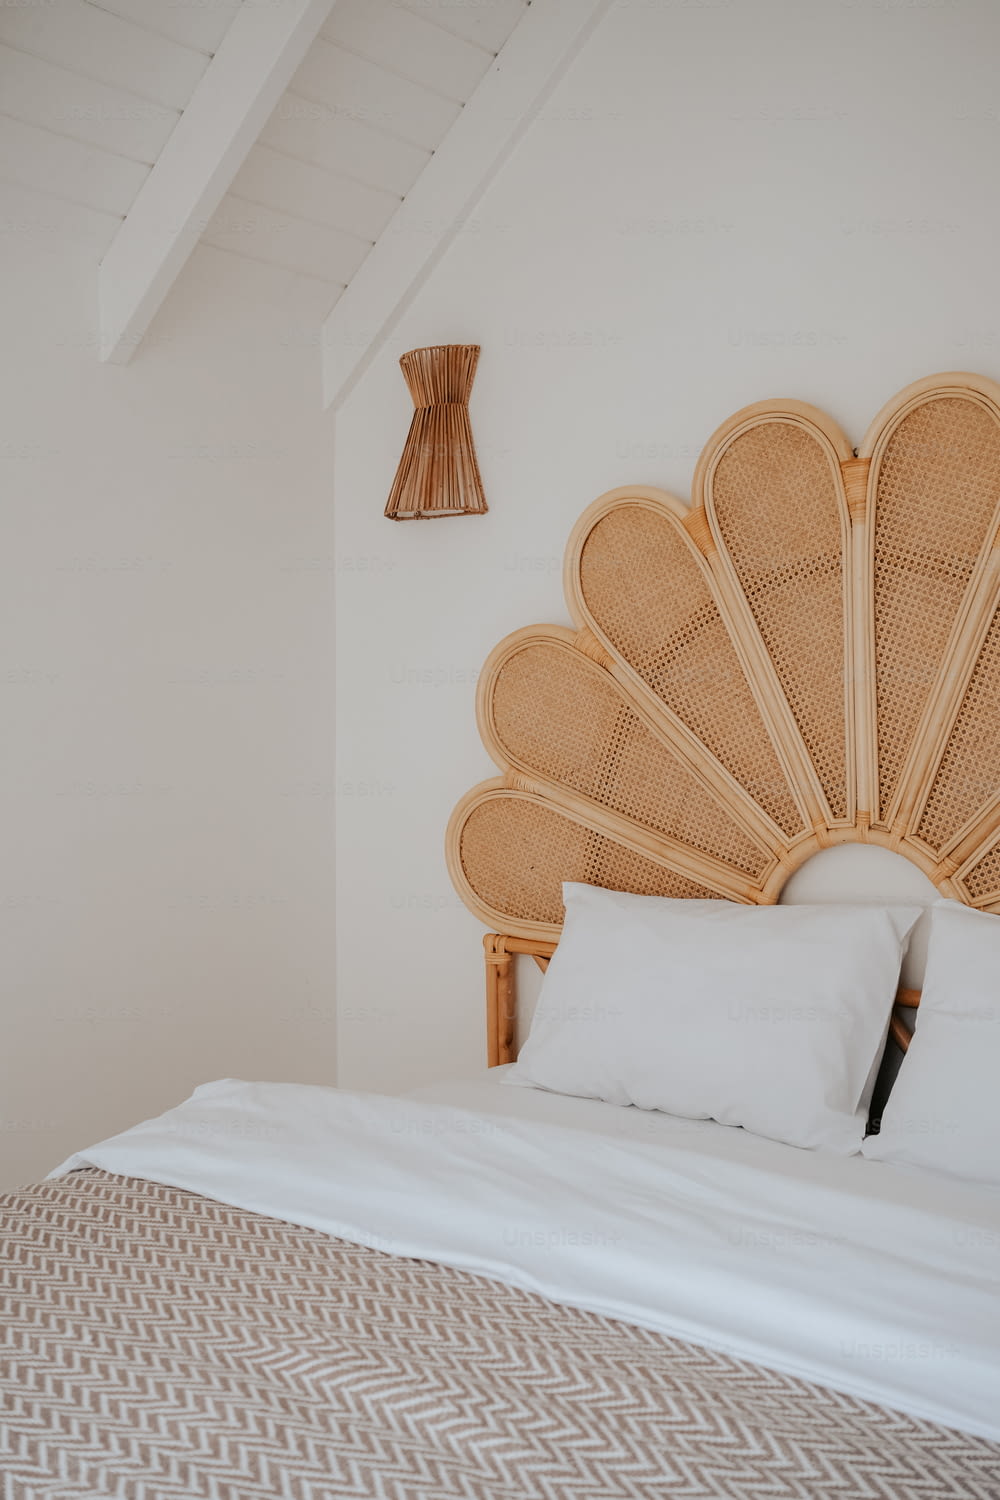 a bed with a large headboard made of wicker